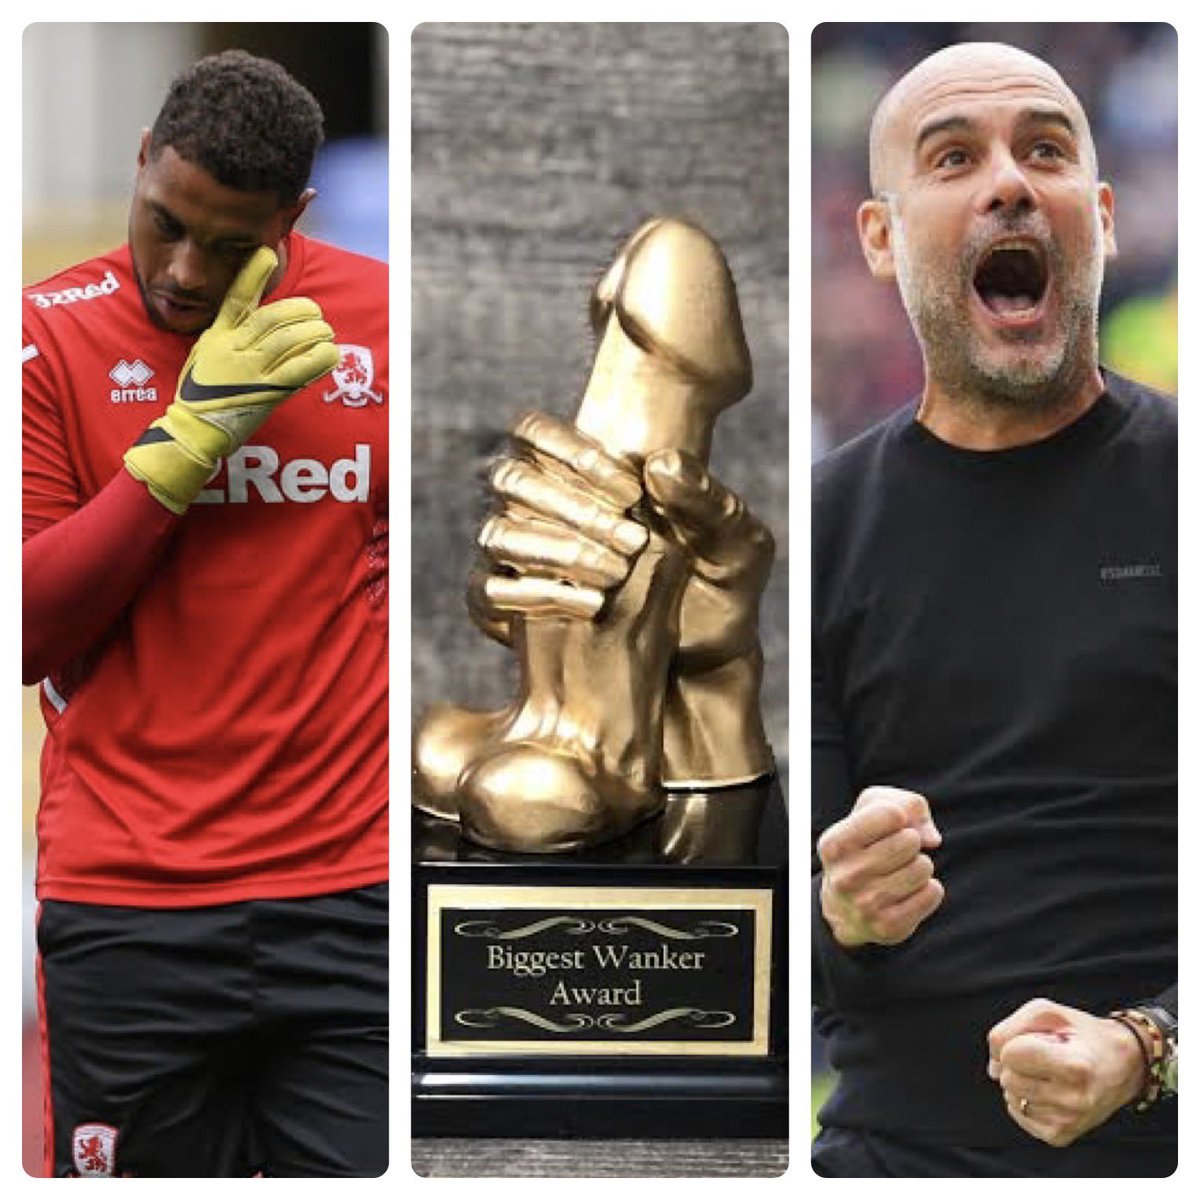 Yenks Abroad presents the 2022-23 Biggest Wanker Award given to the most unlucky player of the season to Zack Steffen!

Not only did Steffen’s departure allow Manchester City to win the treble, but an individual mistake from the #USMNT player also cost Middlesbrough promotion!